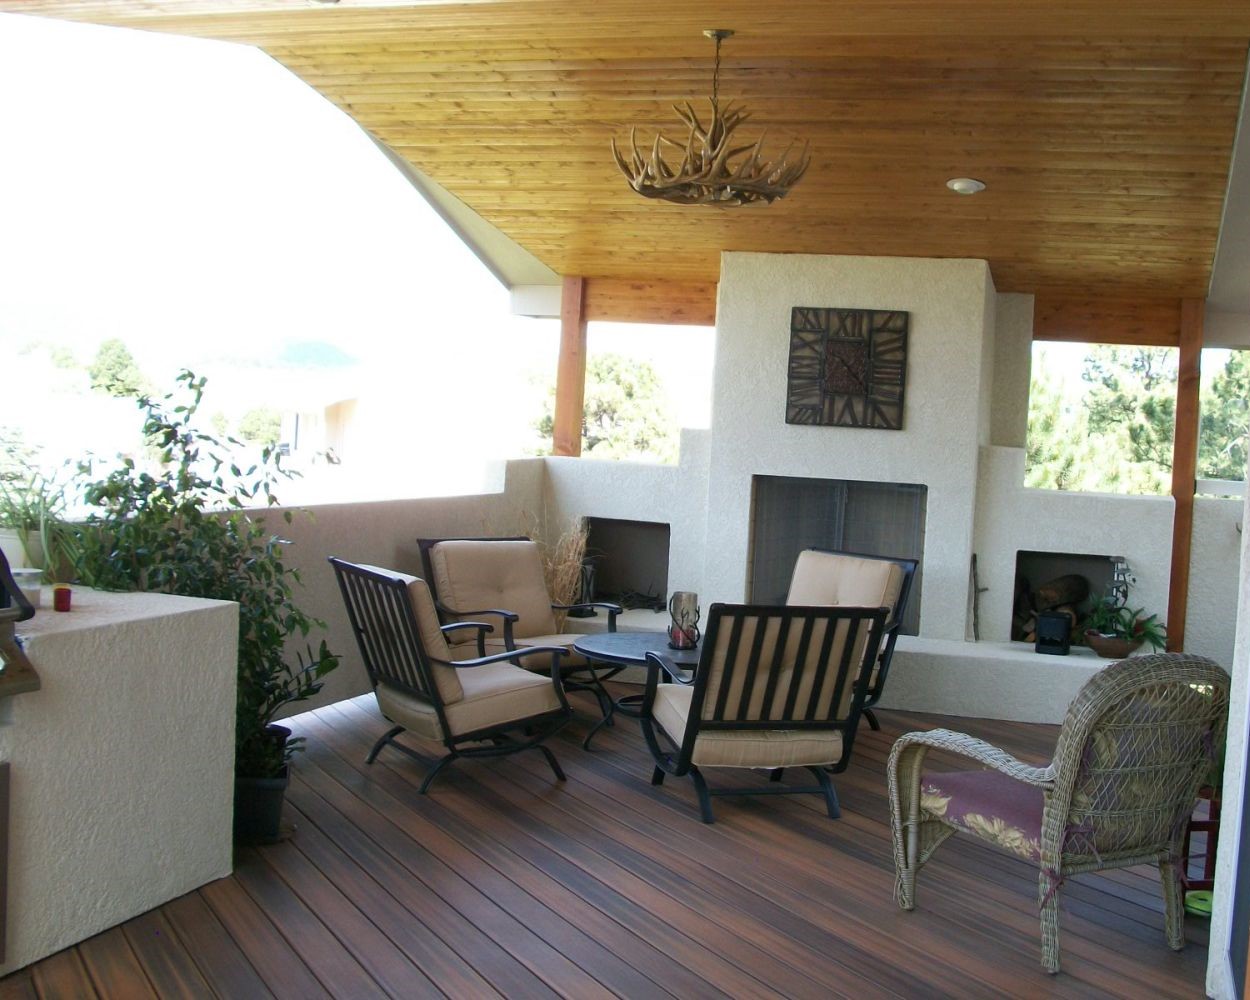 Amazing outdoor living space with composite deck, gabled deck cover, and stucco wood-burning fireplace.